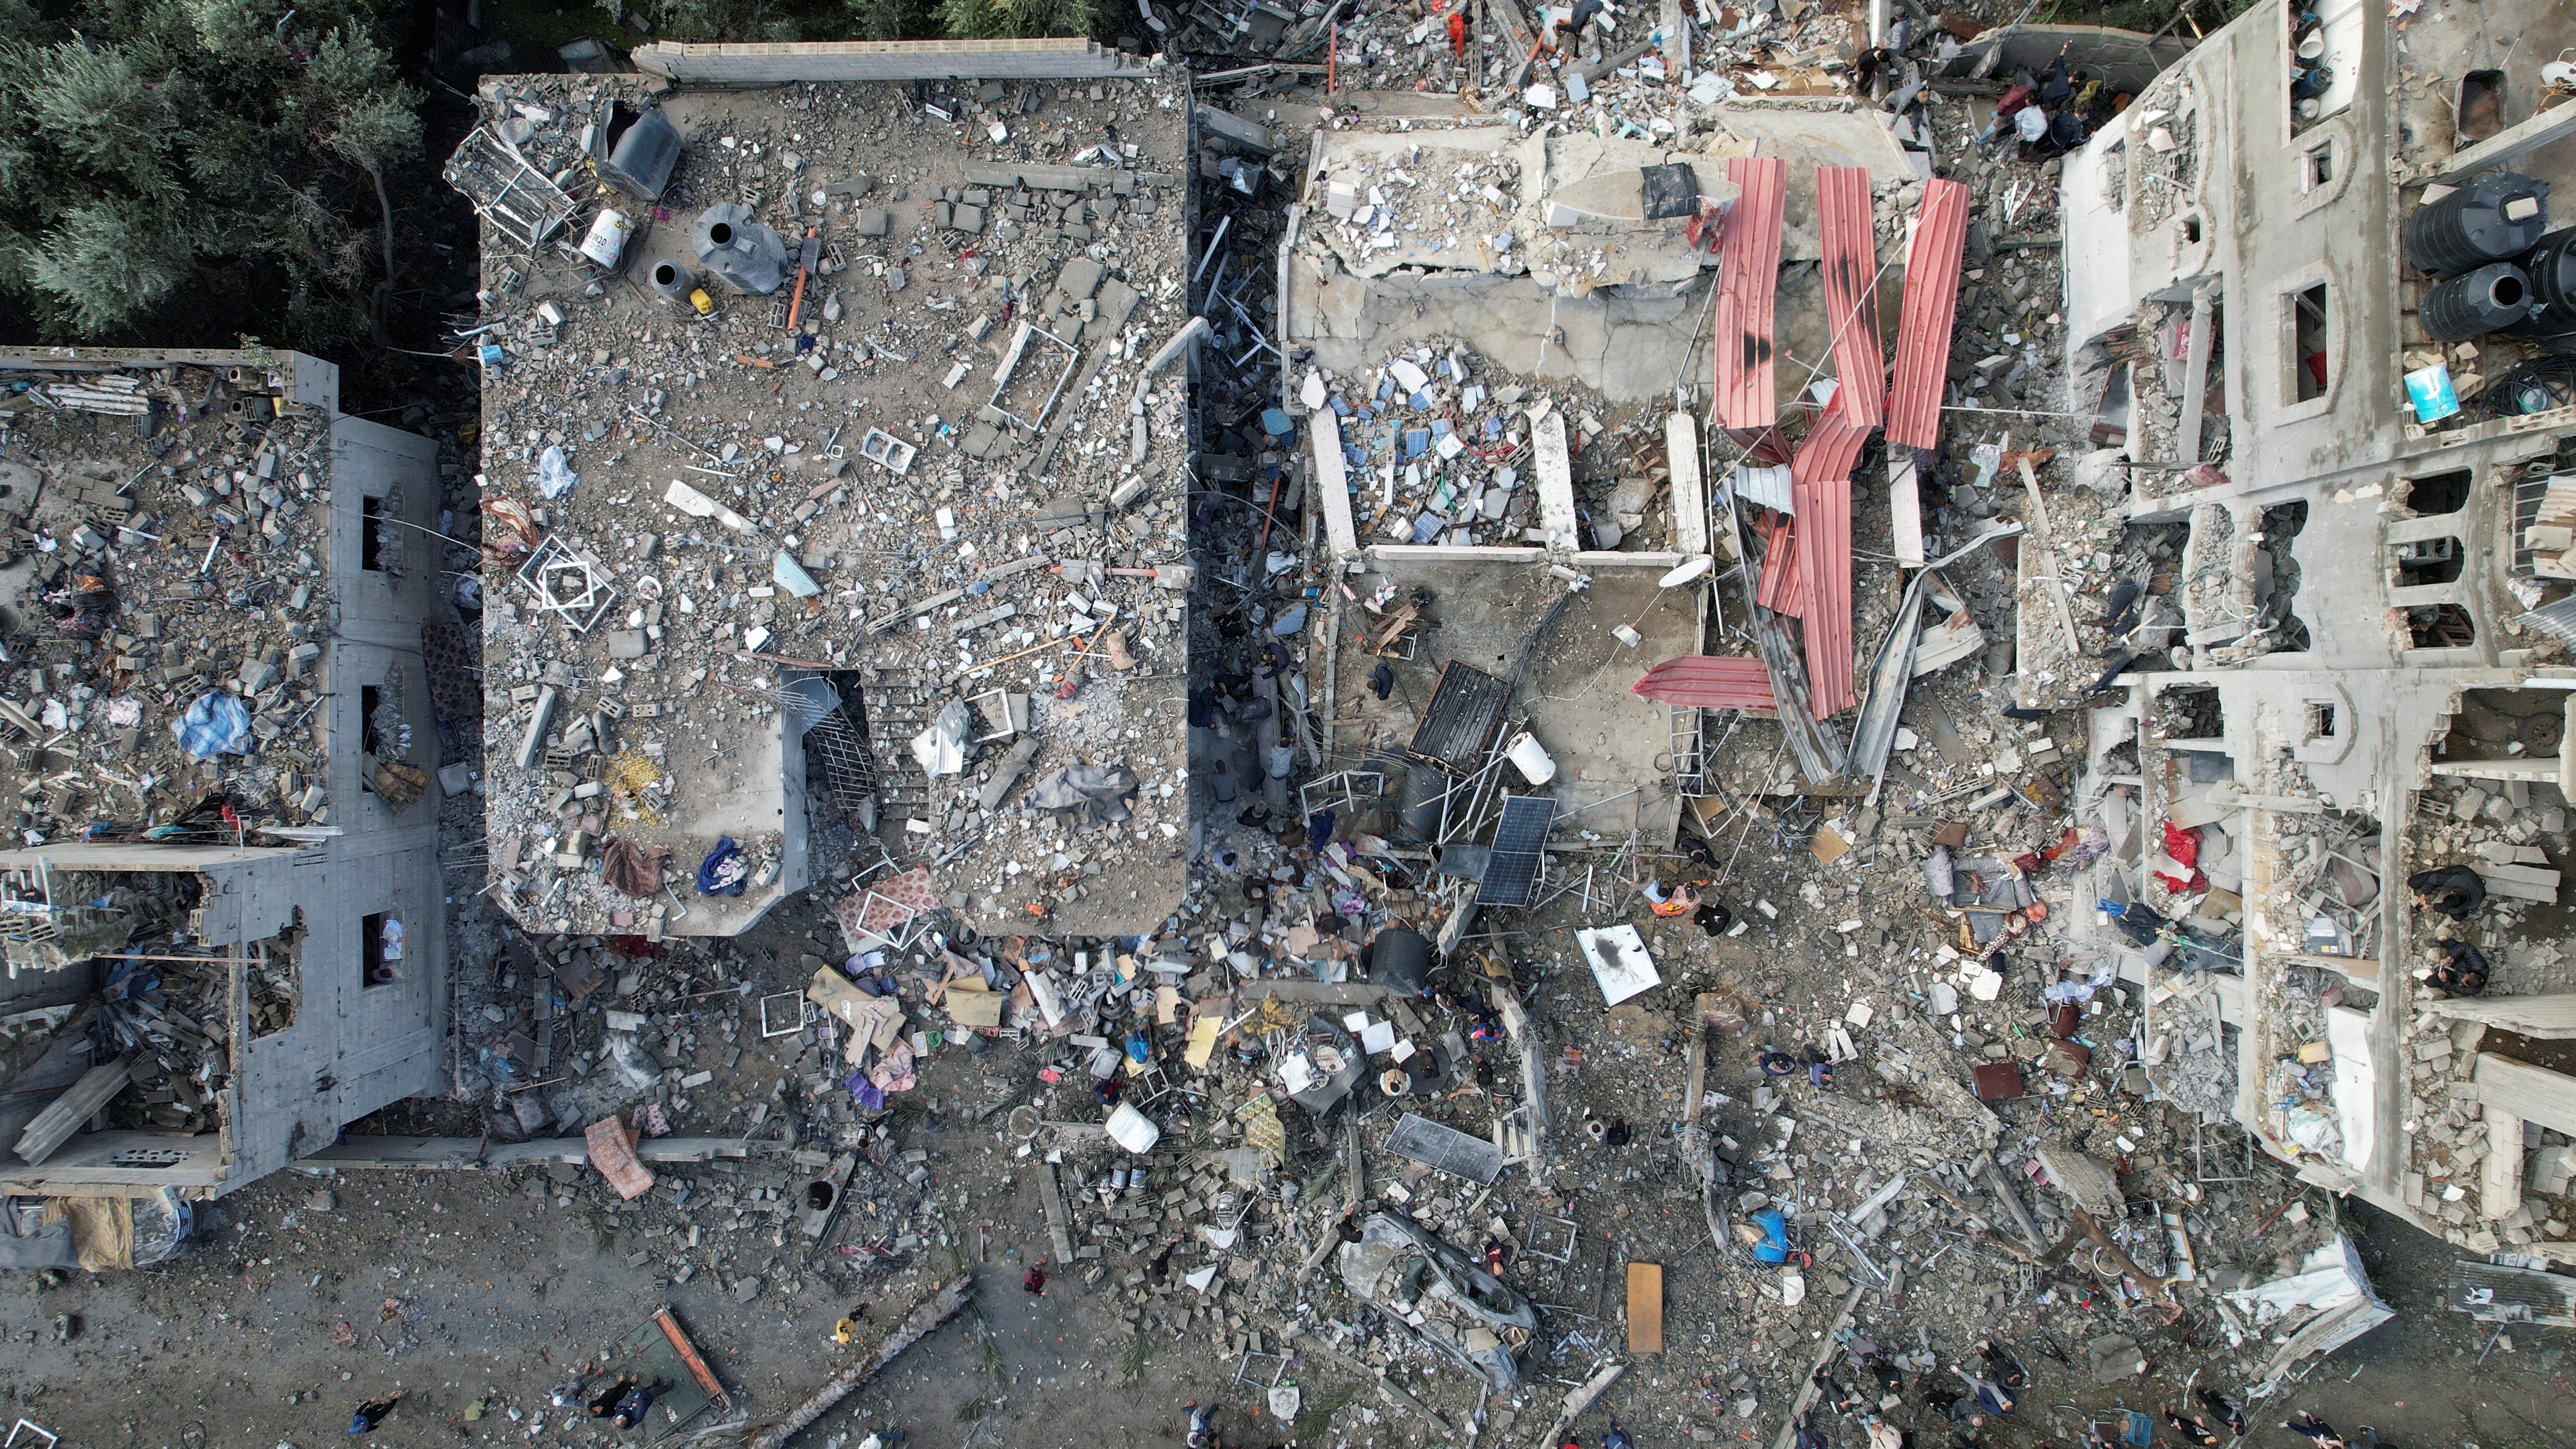 An aerial shot showing the scale of the damage